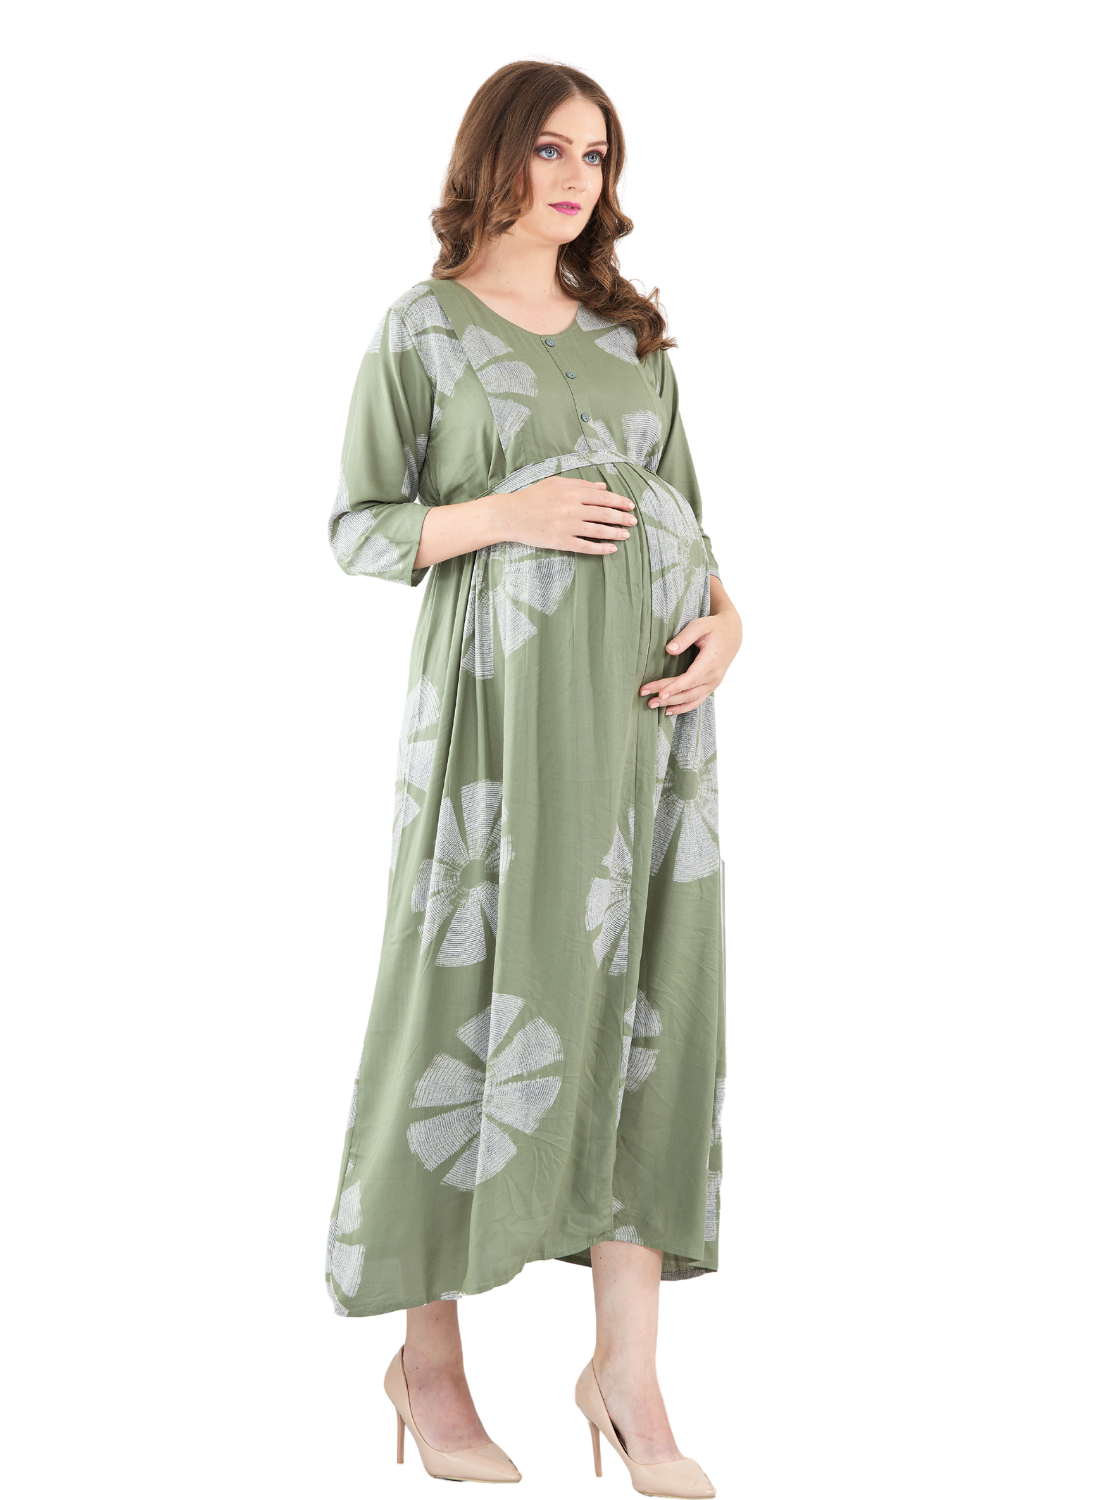 New ONLY MINE Premium 4-IN-ONE Mom's Wear - Soft & Smooth Rayon | Maternity | Feeding | Long Frock | Casual Wear for Pregnancy Women's